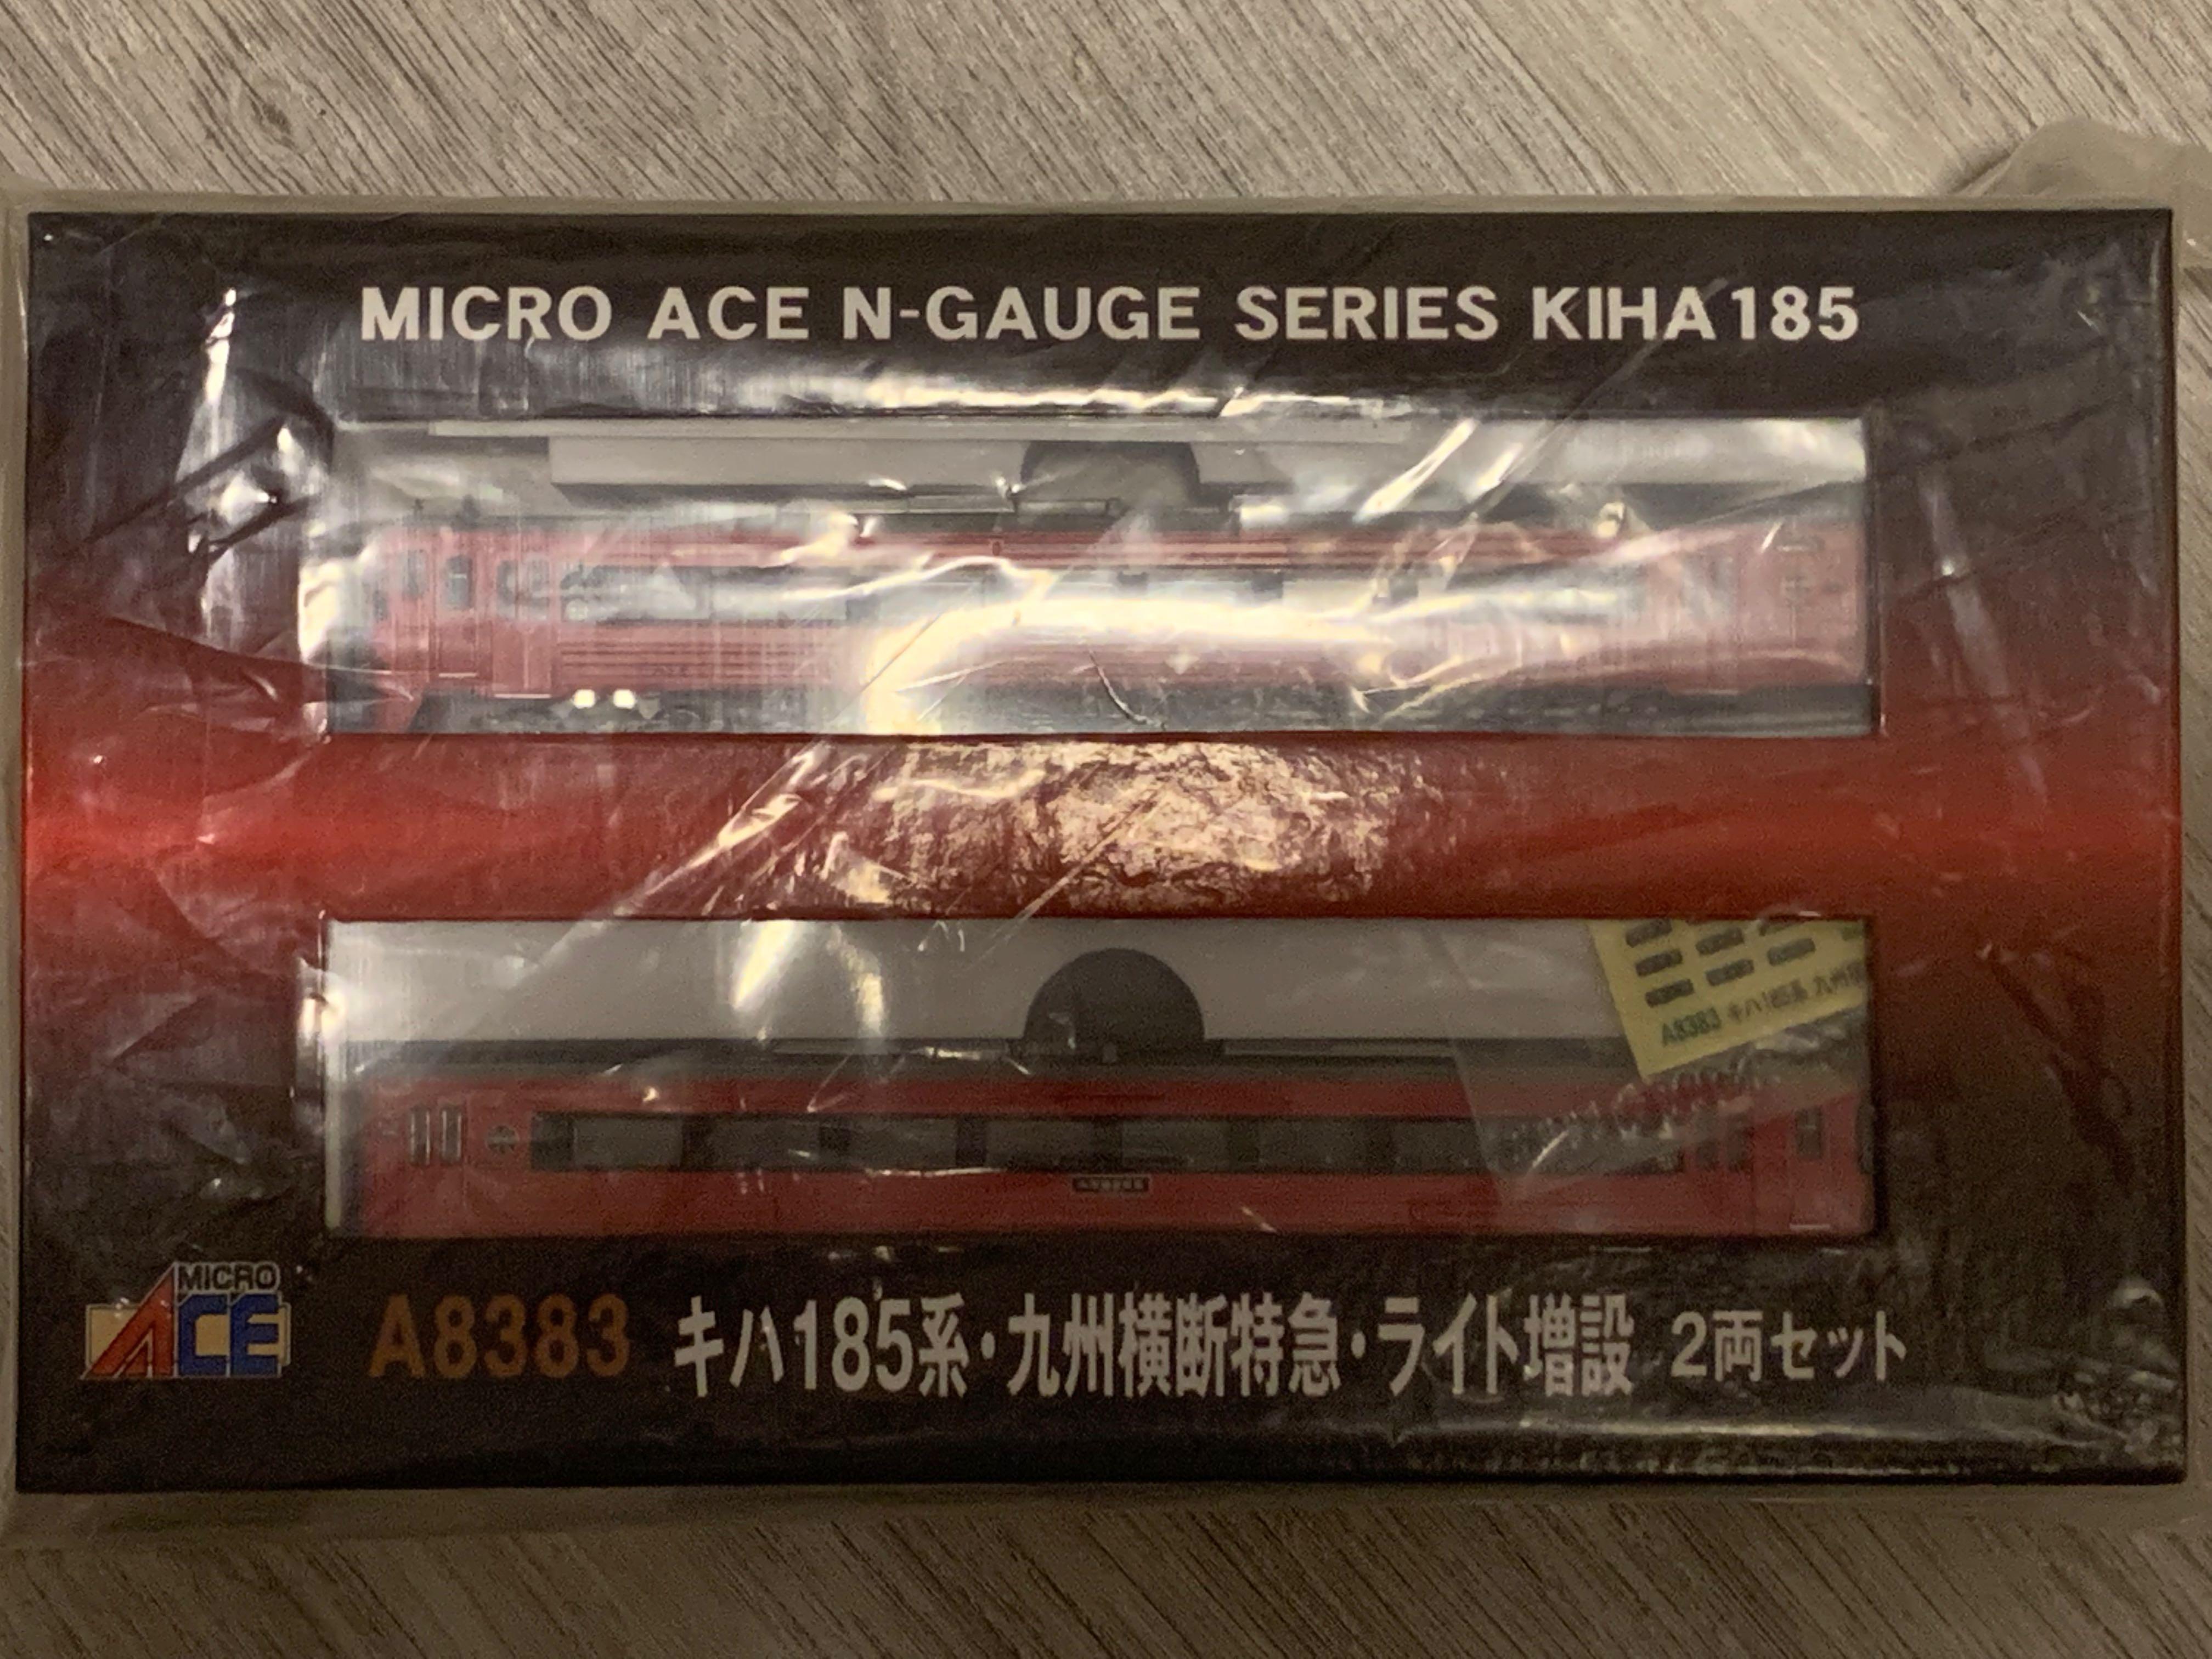 Microace A8383 キハ185系・九州横断特急・ライト増設2両セット, 興趣